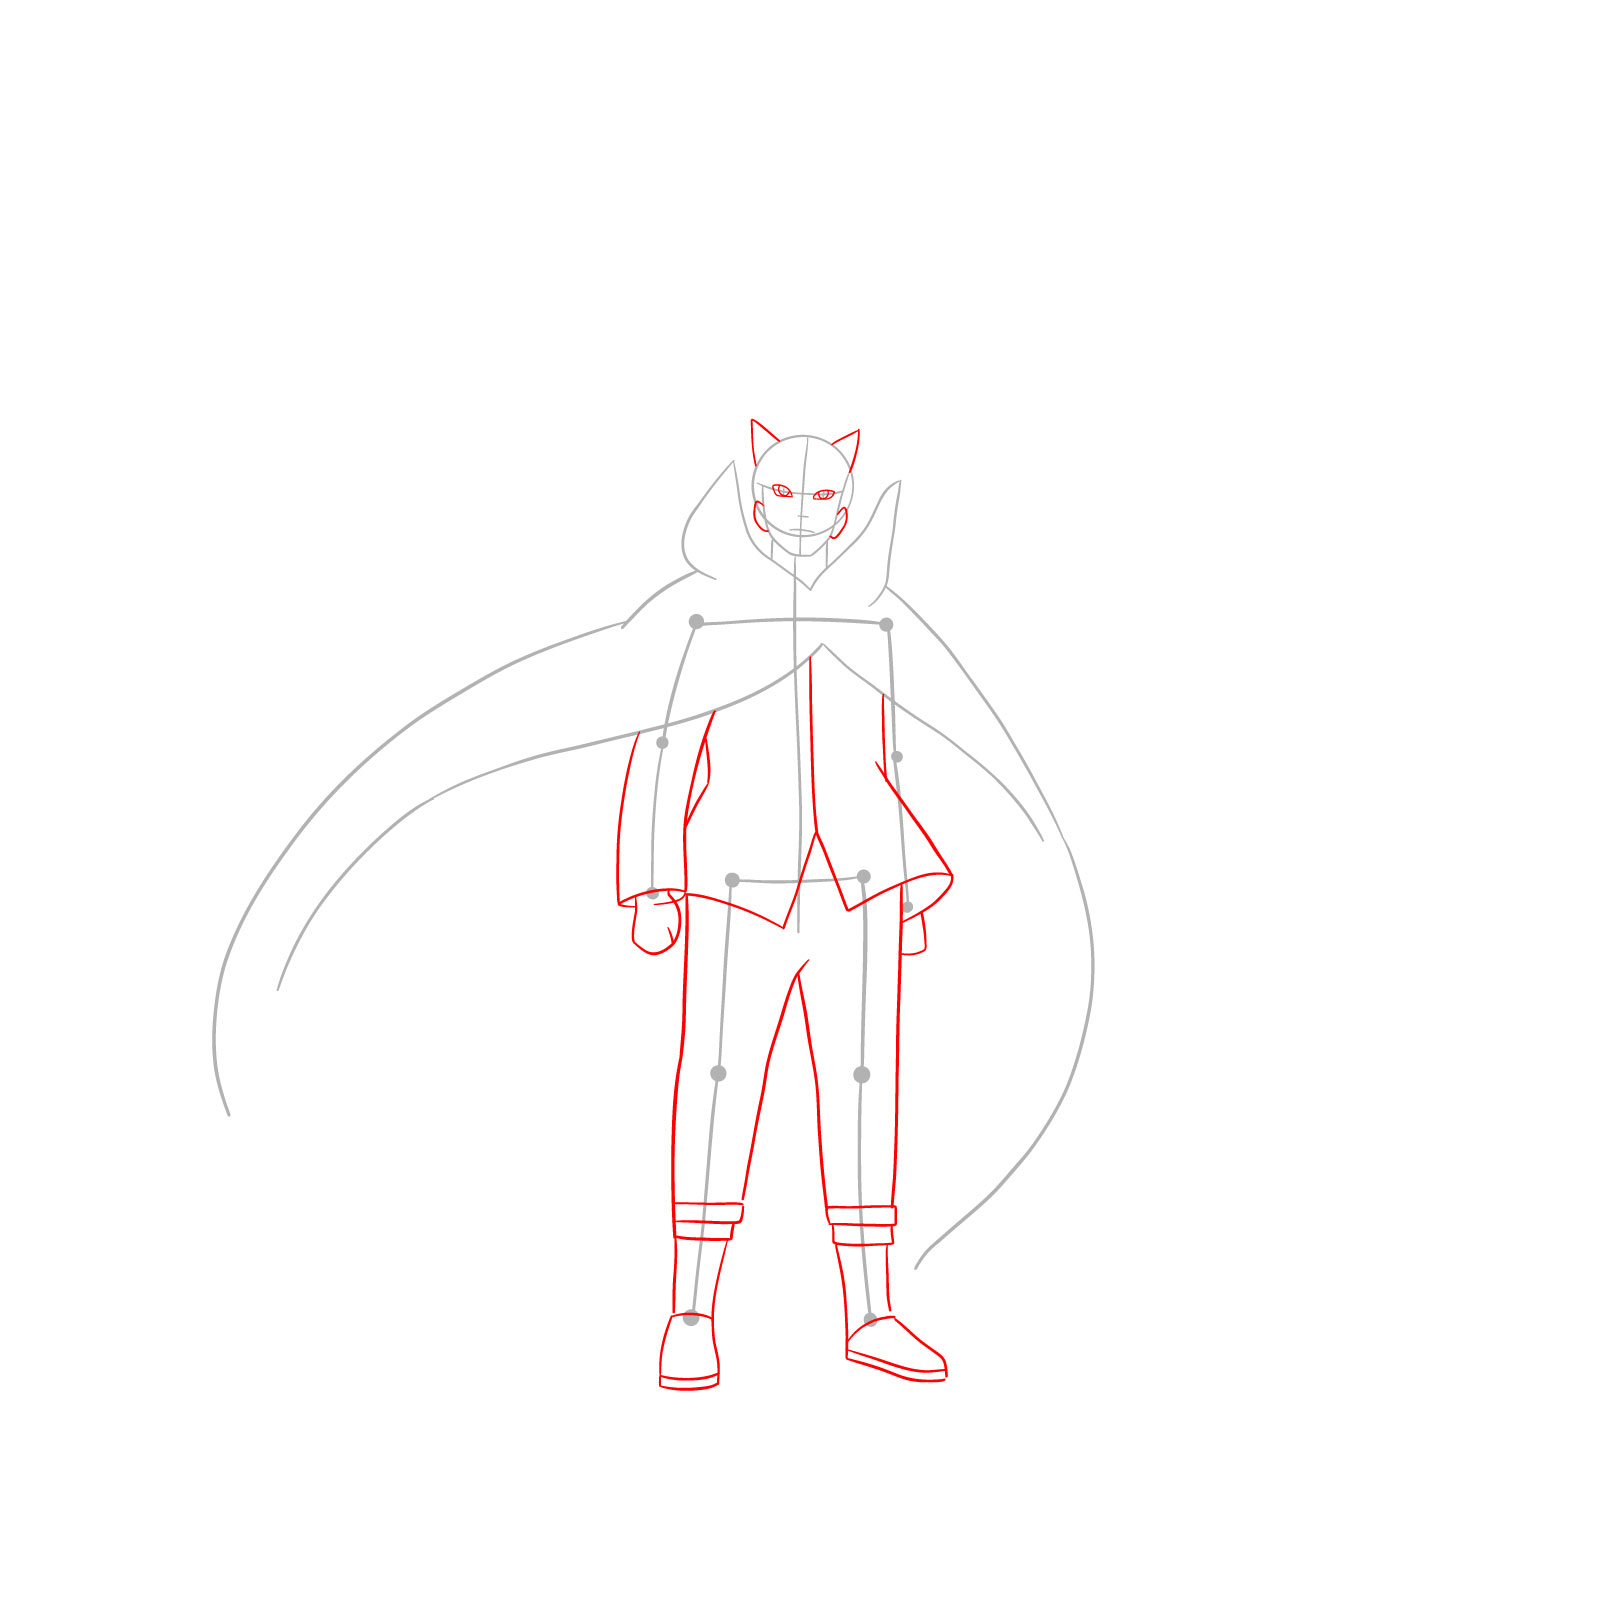 Mapping of Naruto's facial features with light outlines and basic shapes for the torso, arms, and legs - step 03